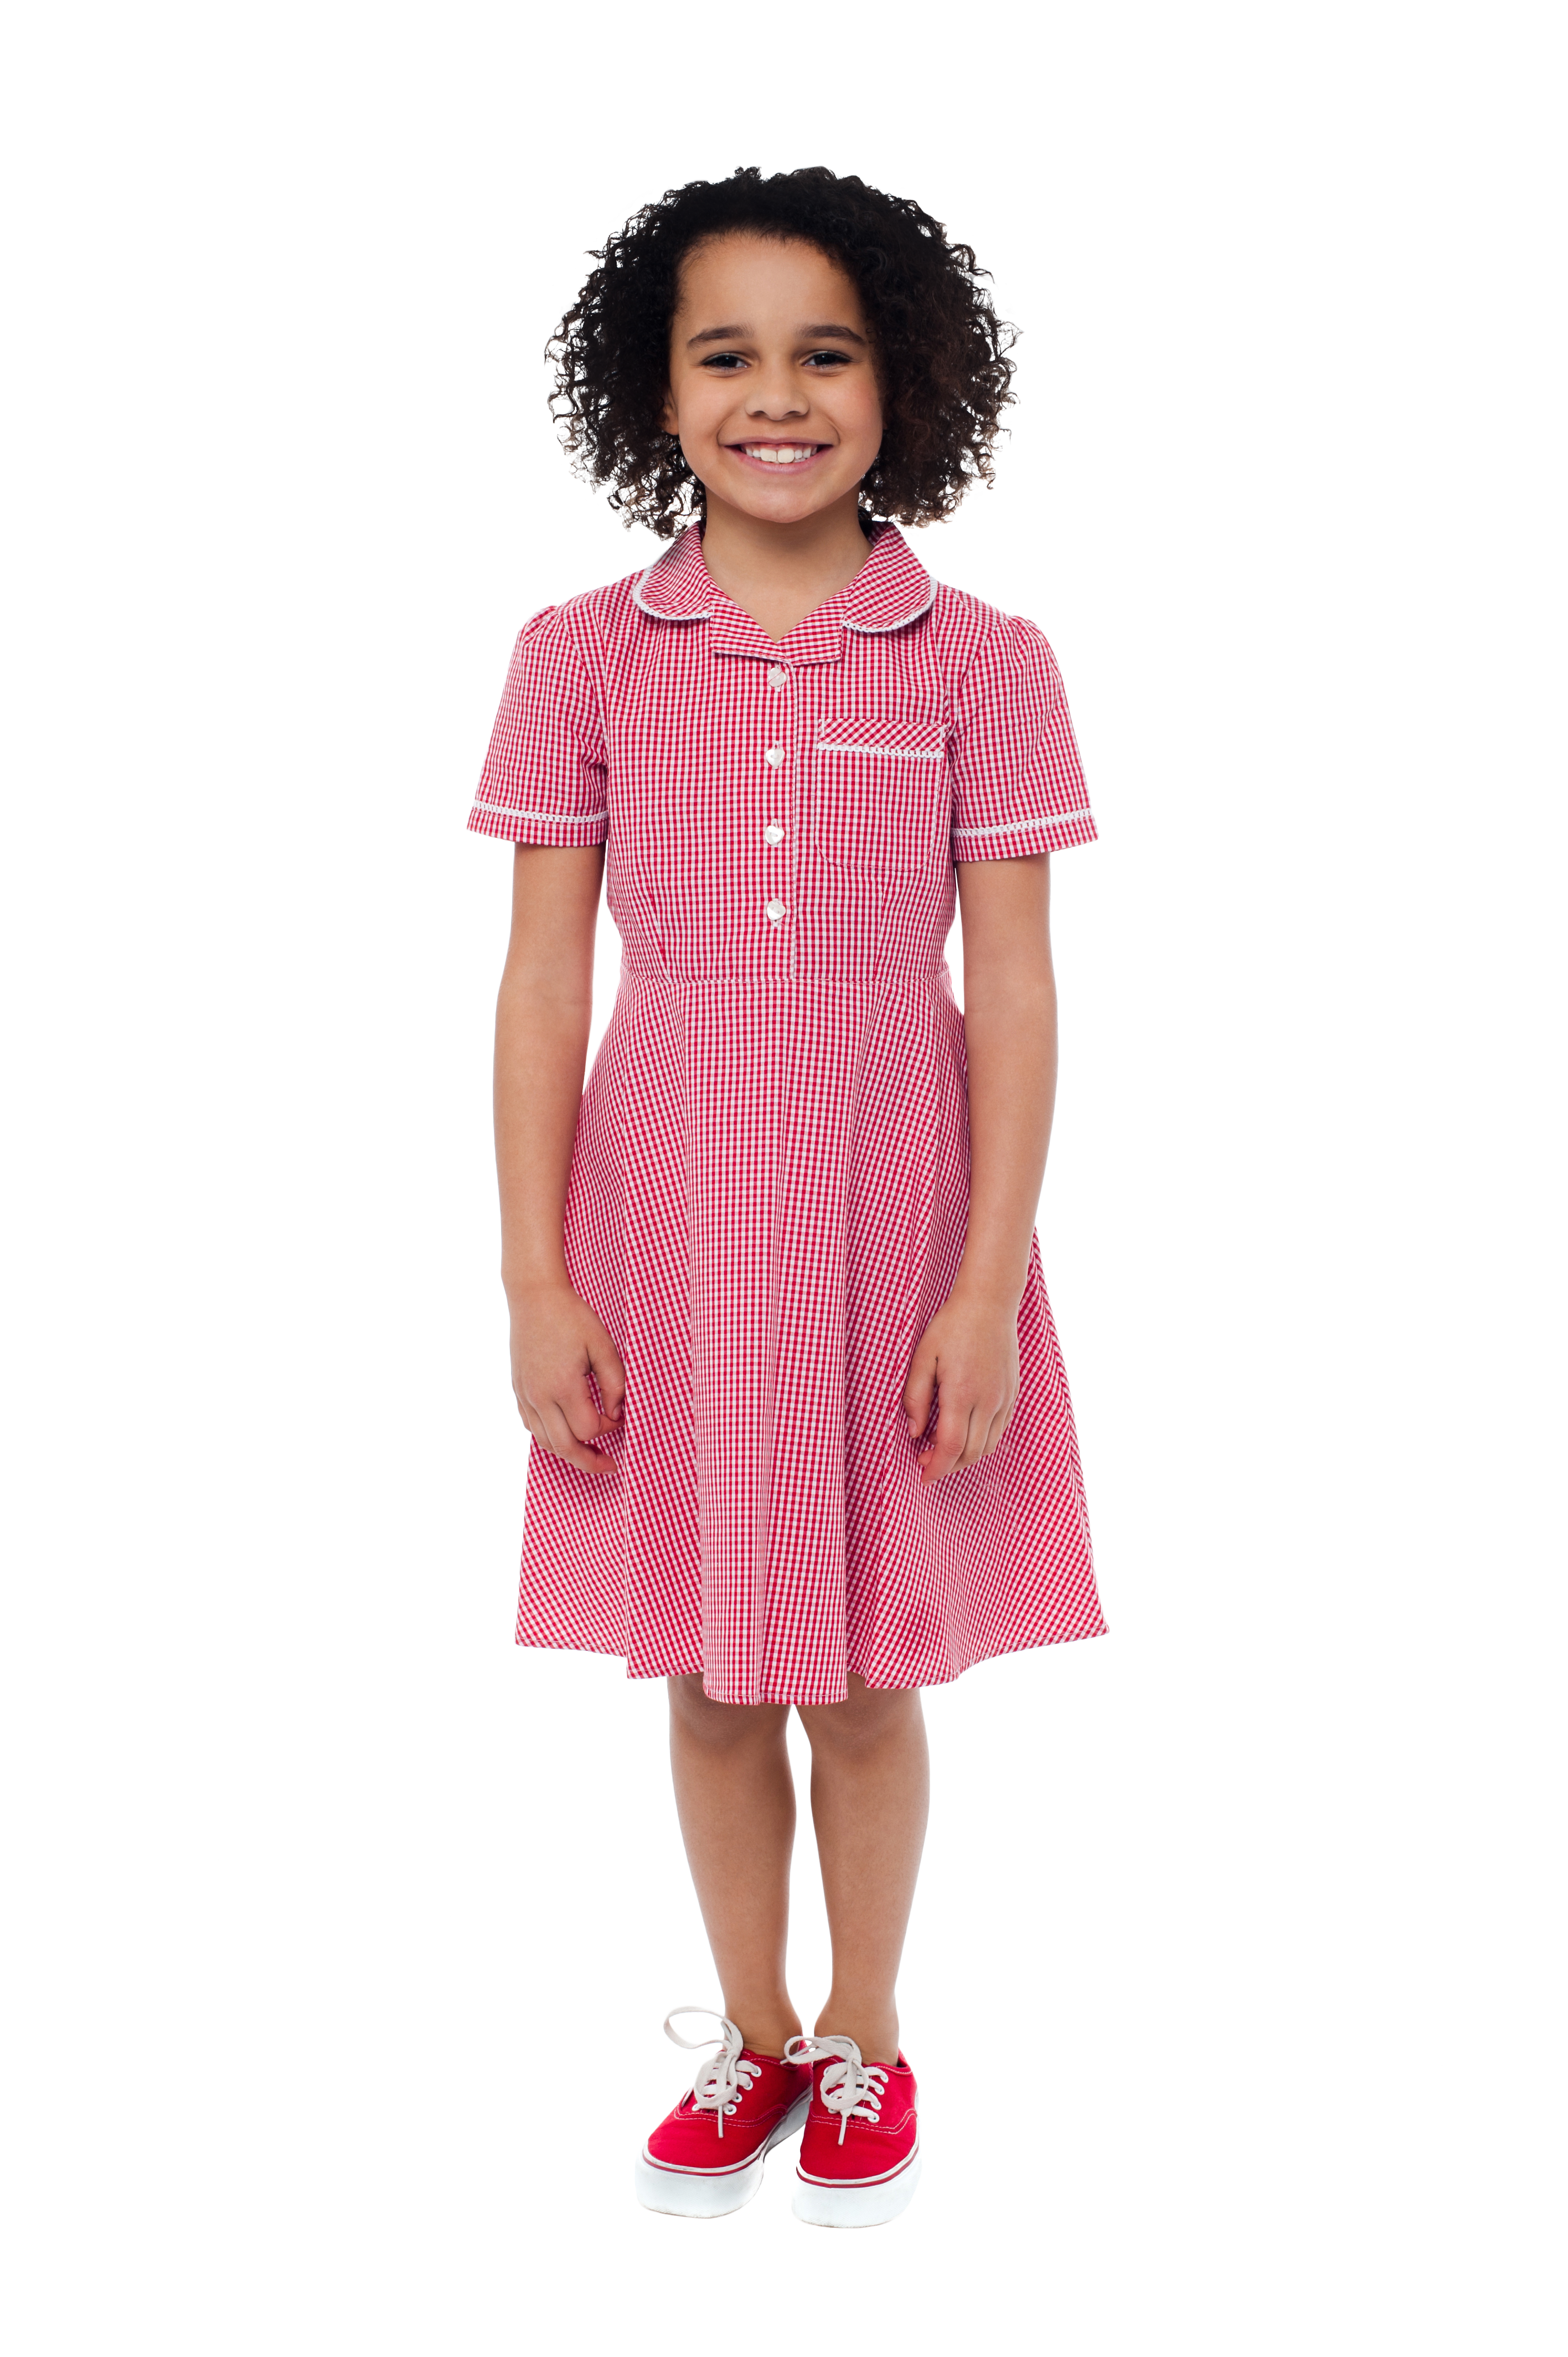 Child Girl PNG Image - PurePNG | Free transparent CC0 PNG Image Library